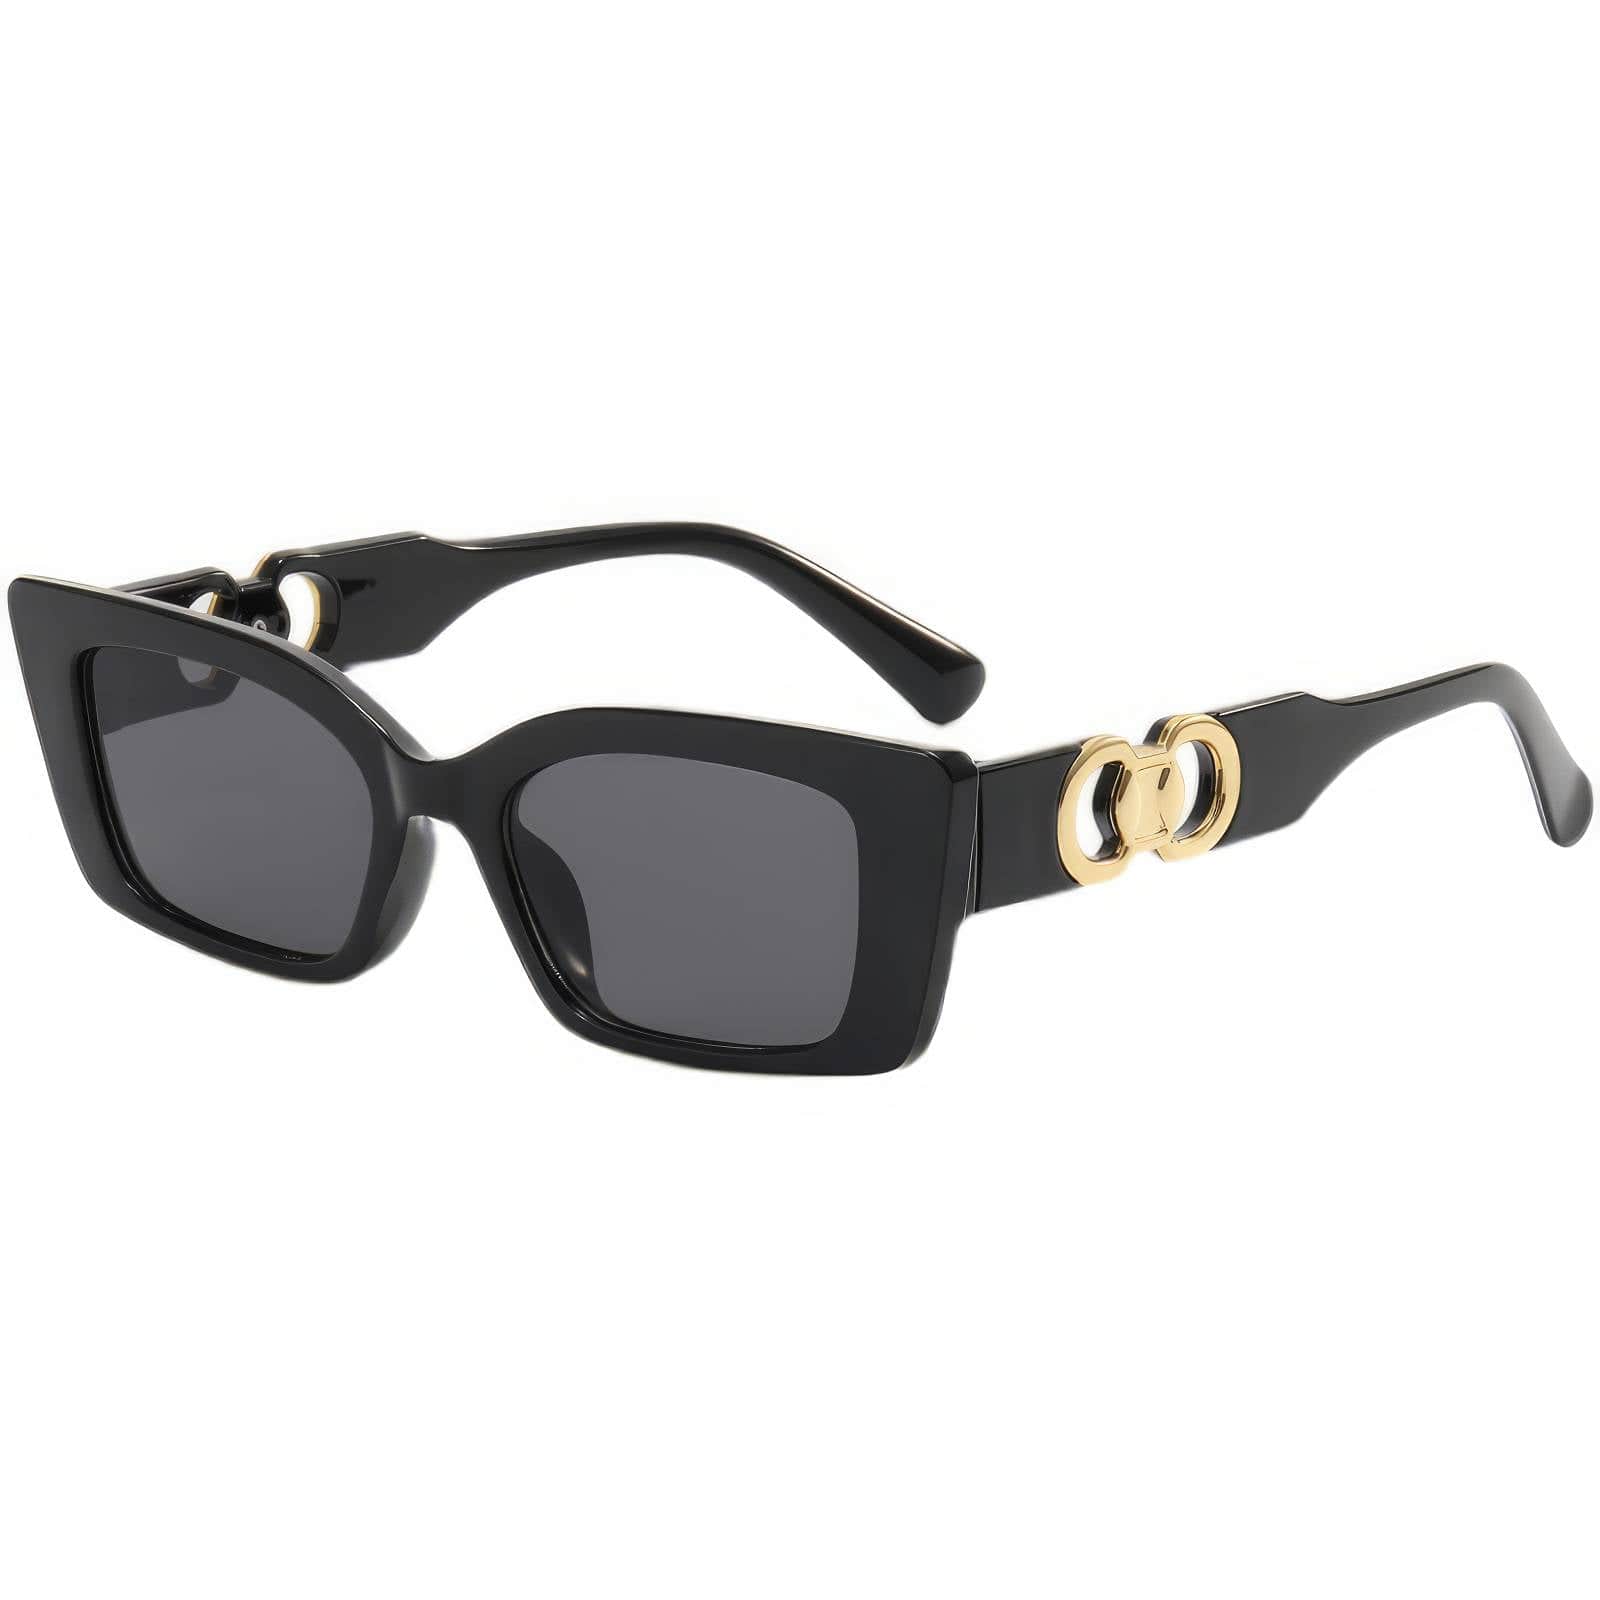 Chunky Candy Sunglasses Sweet Style Black/Gray / Resin